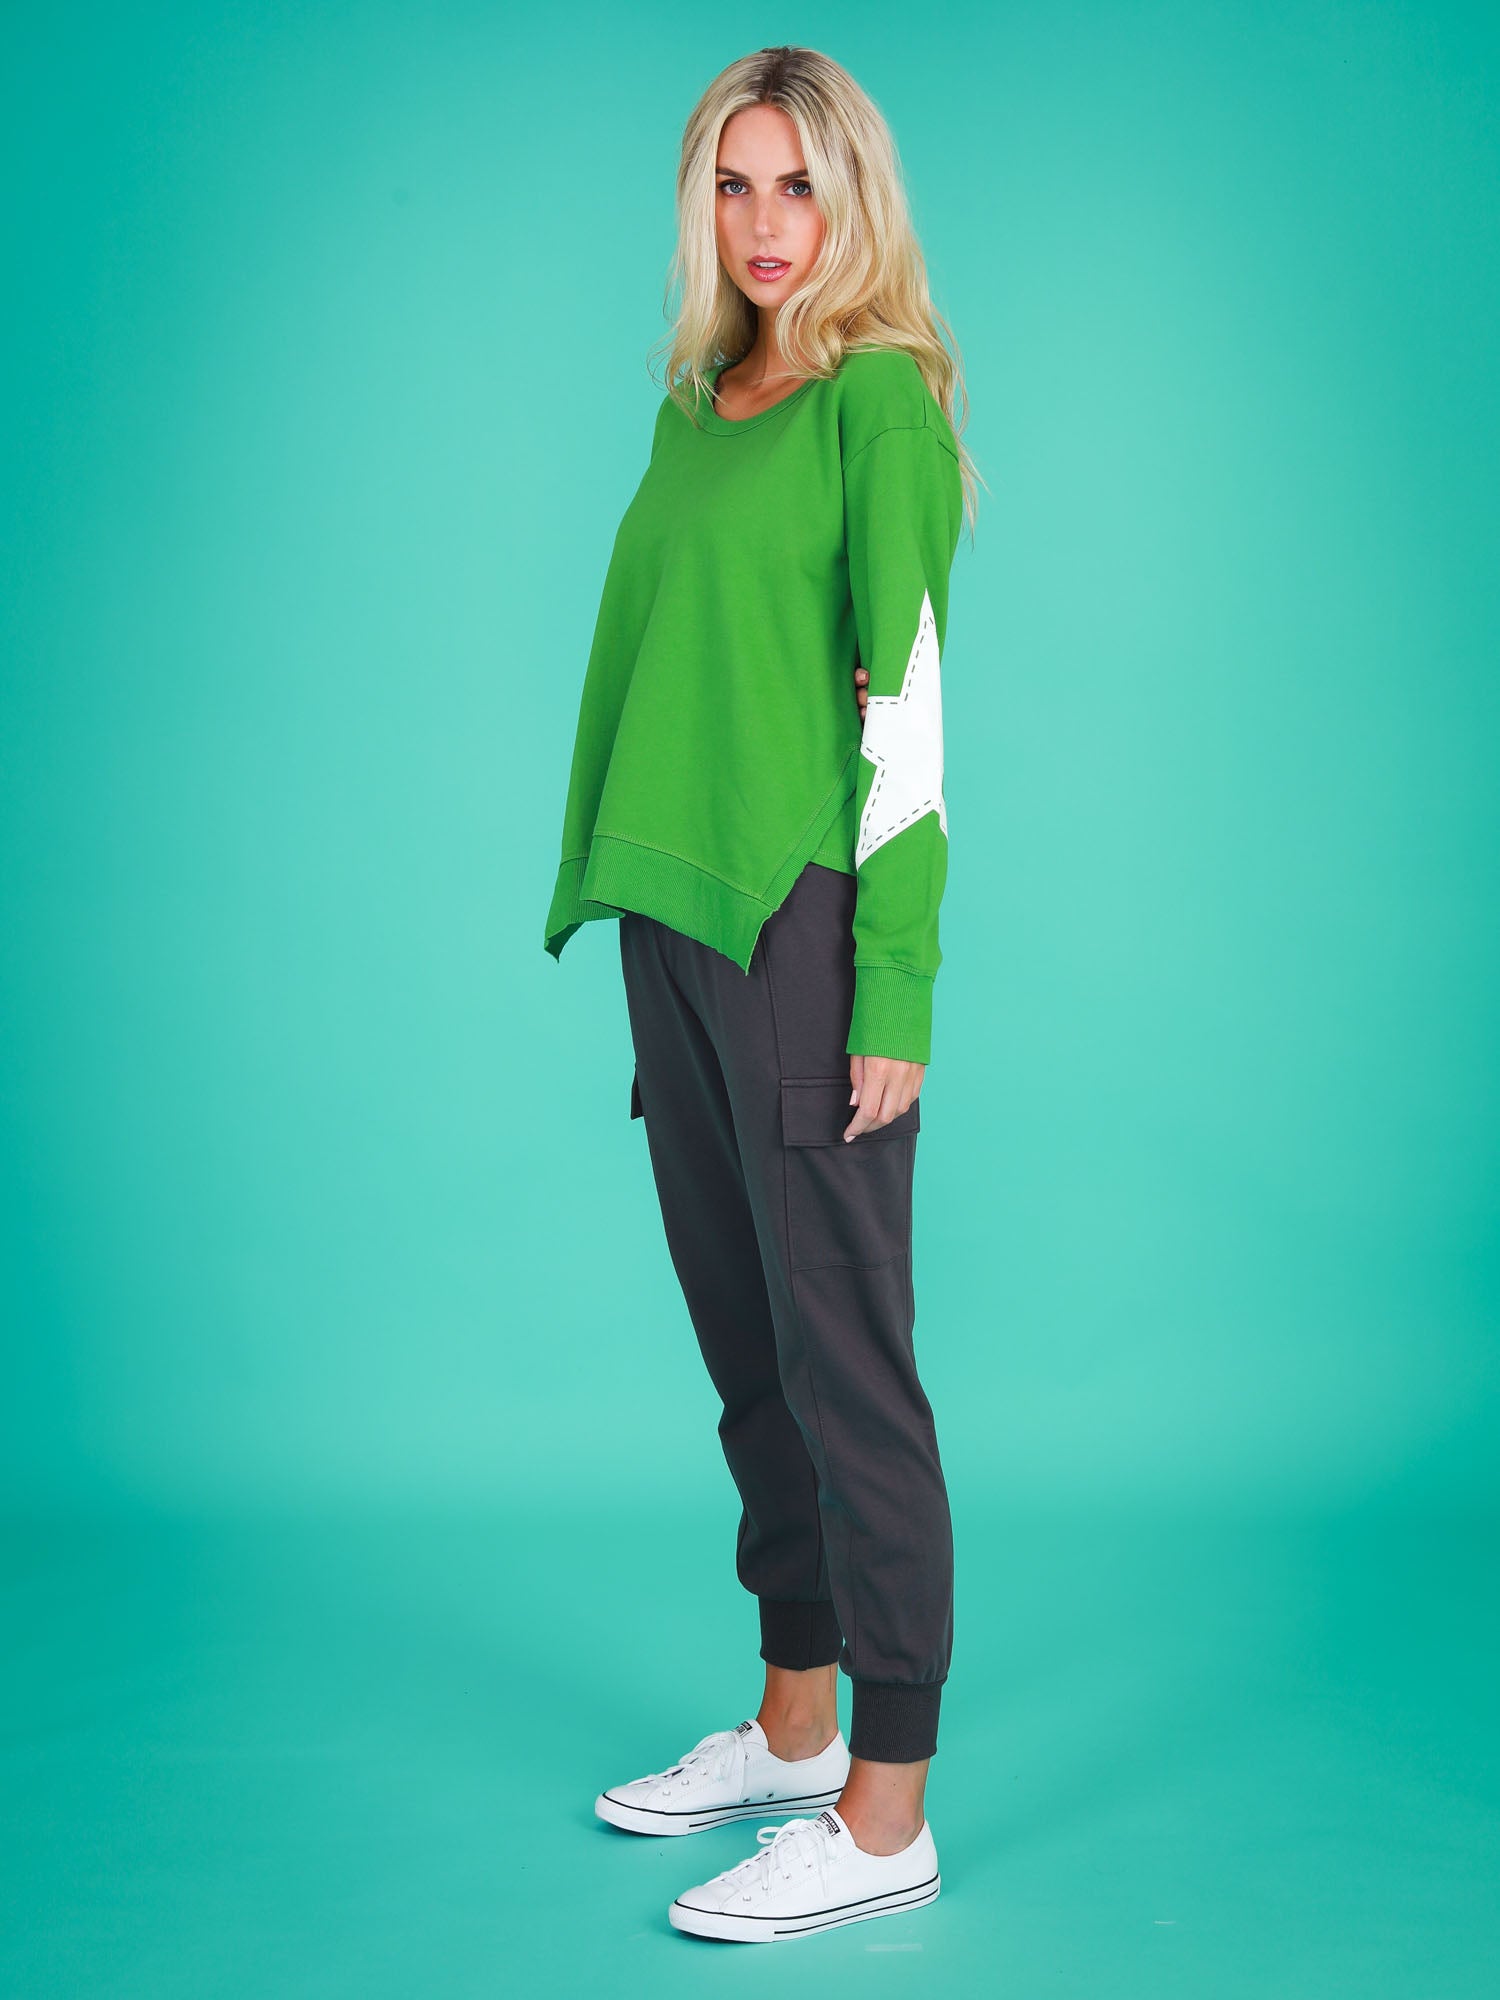 green sweater #color_nephrite